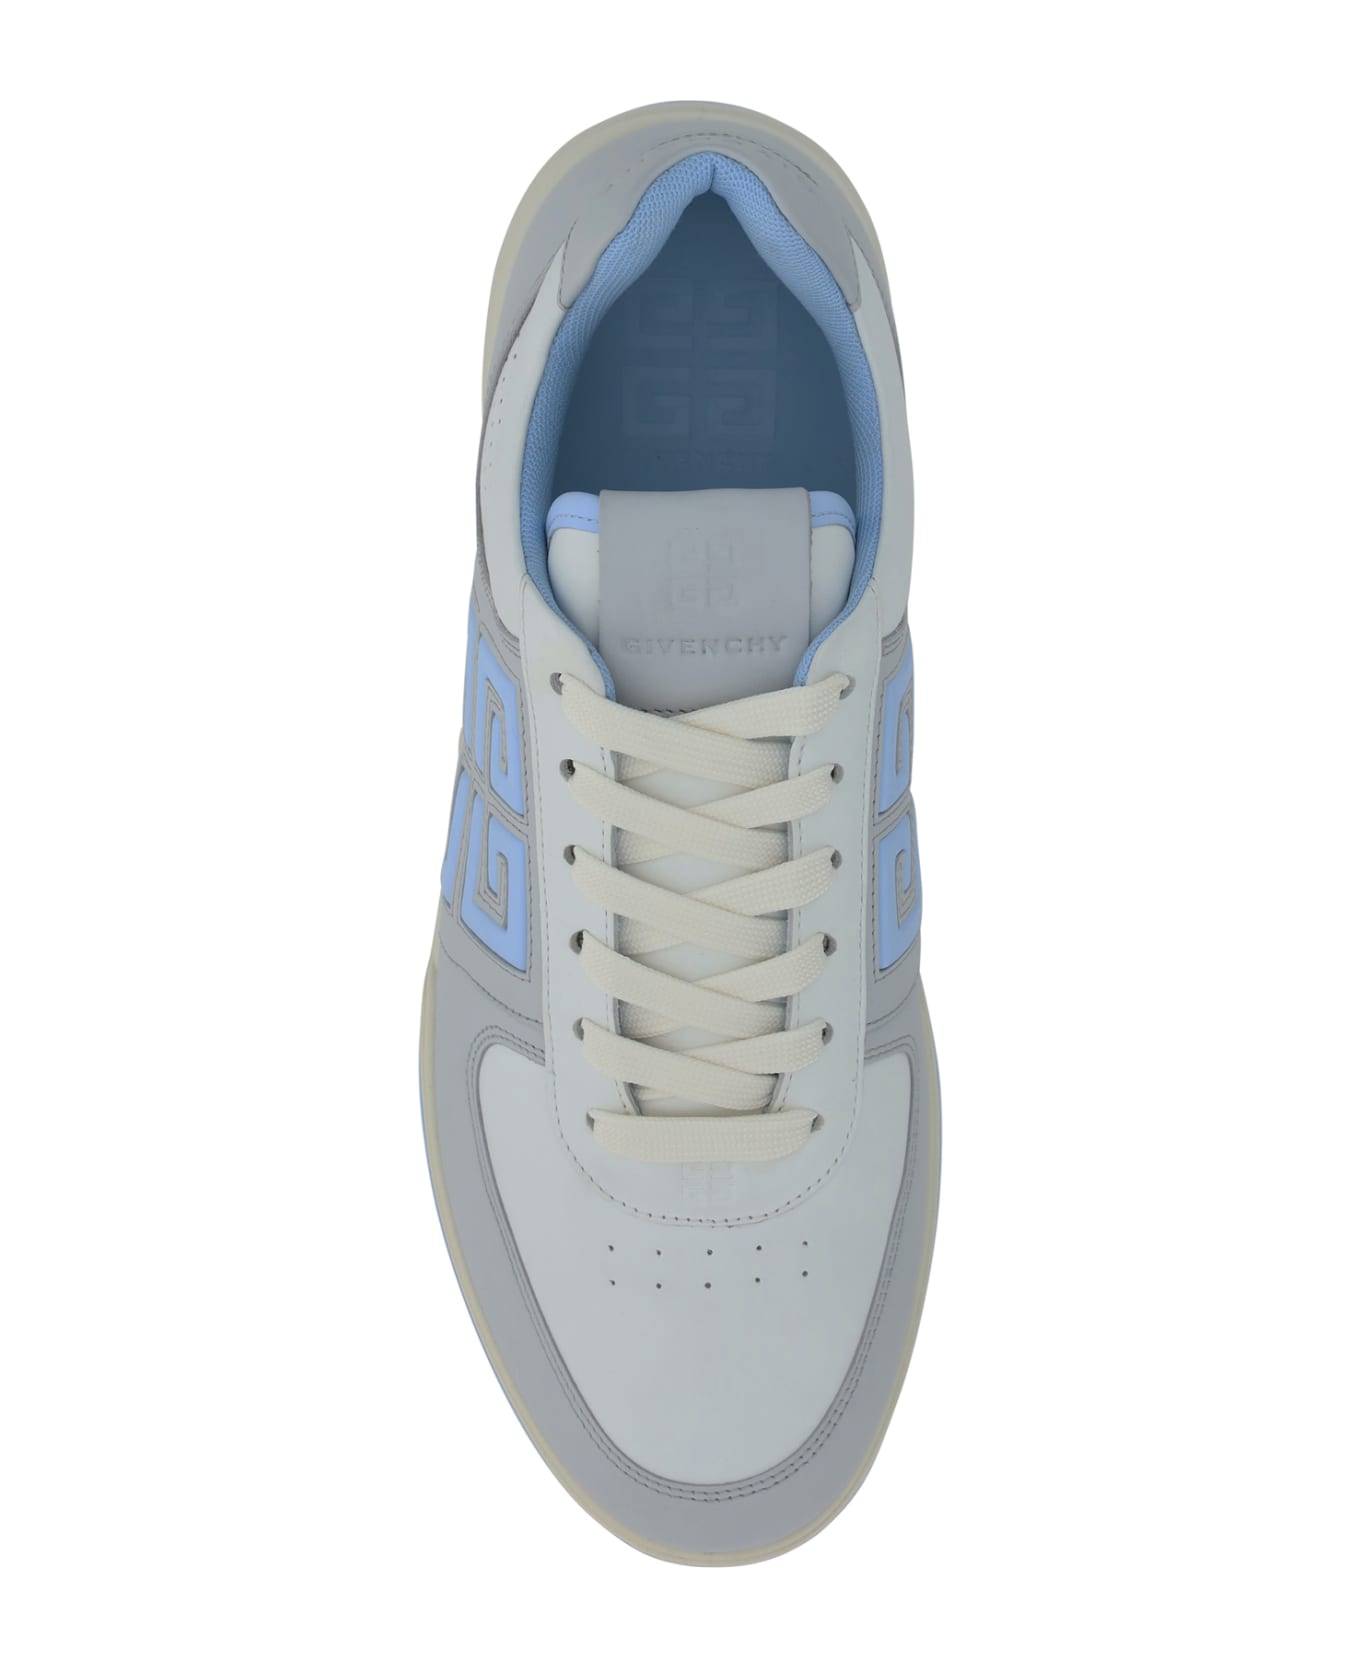 Givenchy G4 Low Top Sneakers - Grey/blue スニーカー